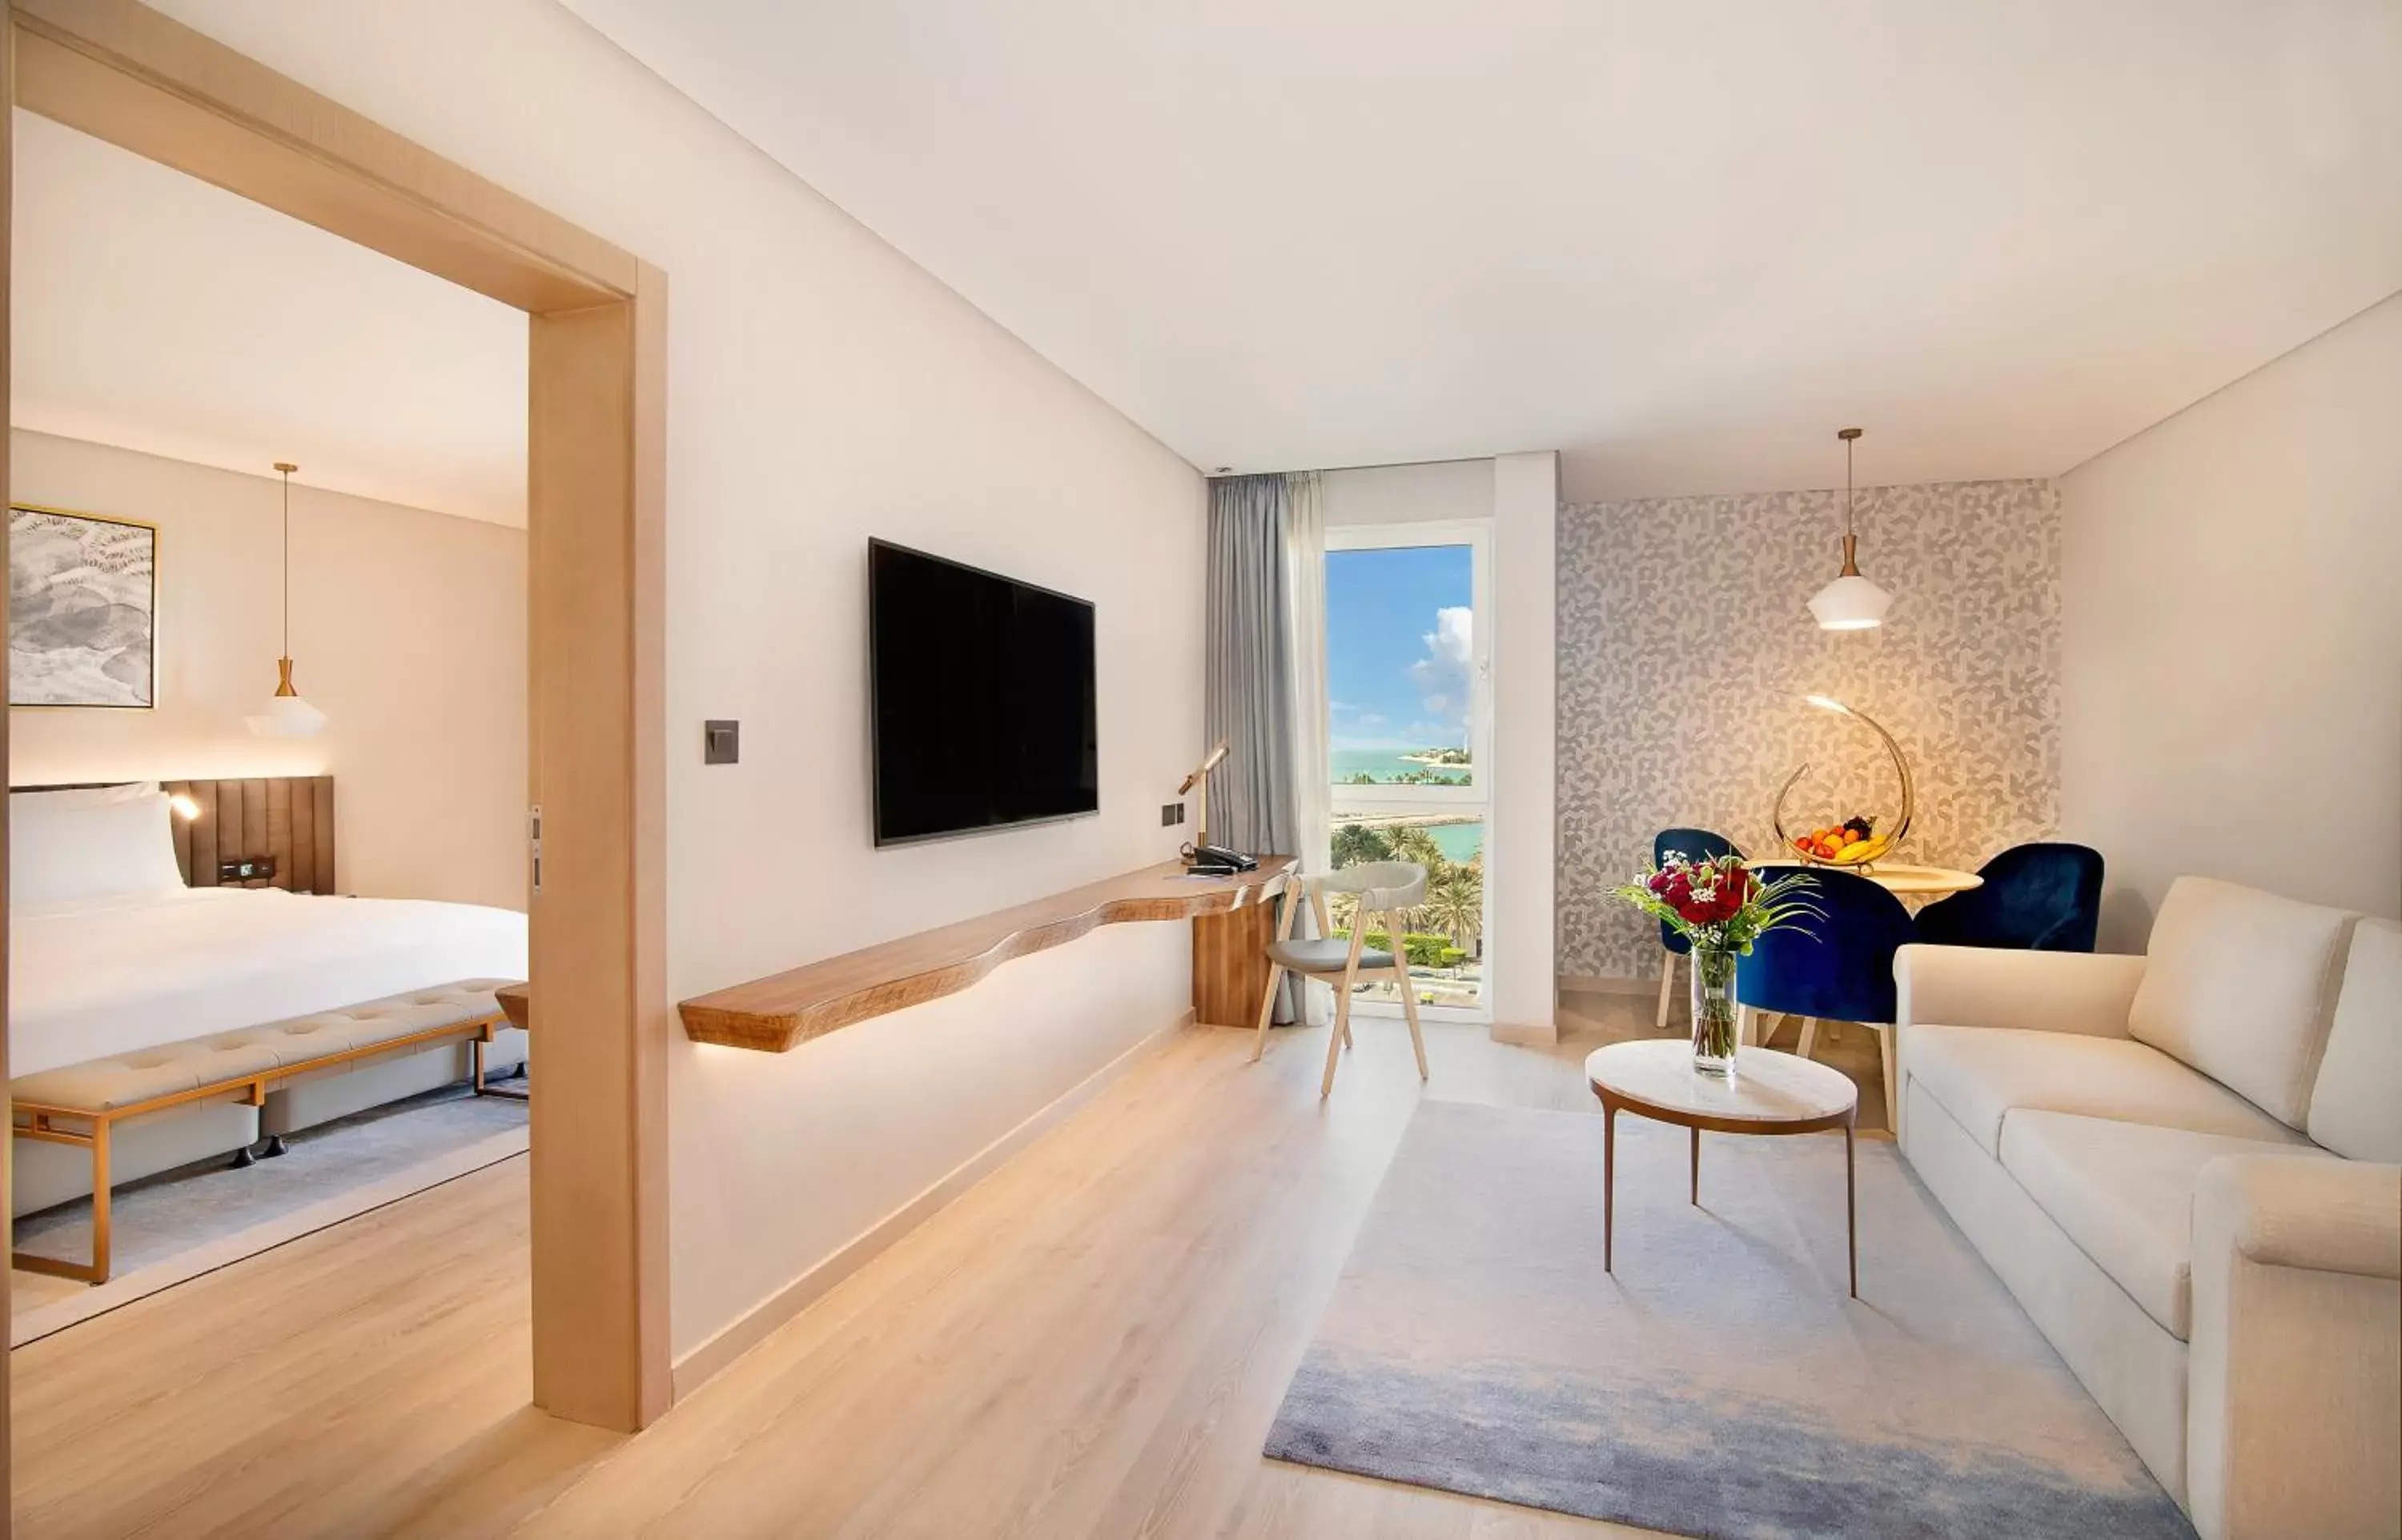 Executive Suite with Sea View and Lounge Access Including Complimentary access to Surf Pool, Adventure Park, Zip Line, Wave Pool and Lazy River in Radisson Blu Hotel & Resort, Abu Dhabi Corniche